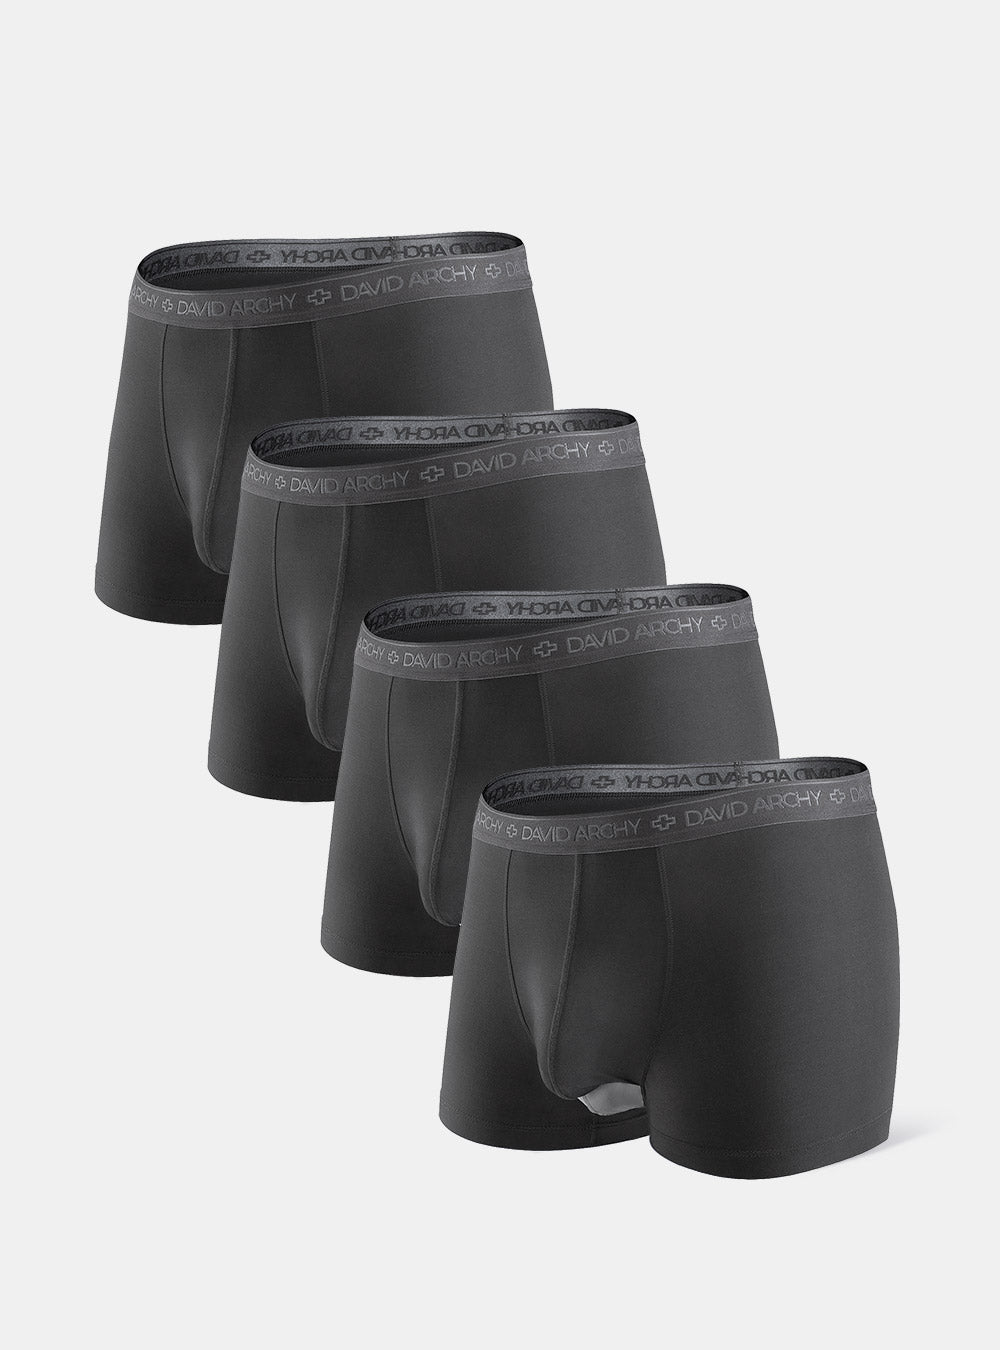 DAVID ARCHY Men's Underwear Micro Modal Dual Pouch Trunks Support Ball Pouch  Bulge Enhancing Boxer Briefs for Men 4 Pack (S, Black) at  Men's  Clothing store: Boxer Briefs